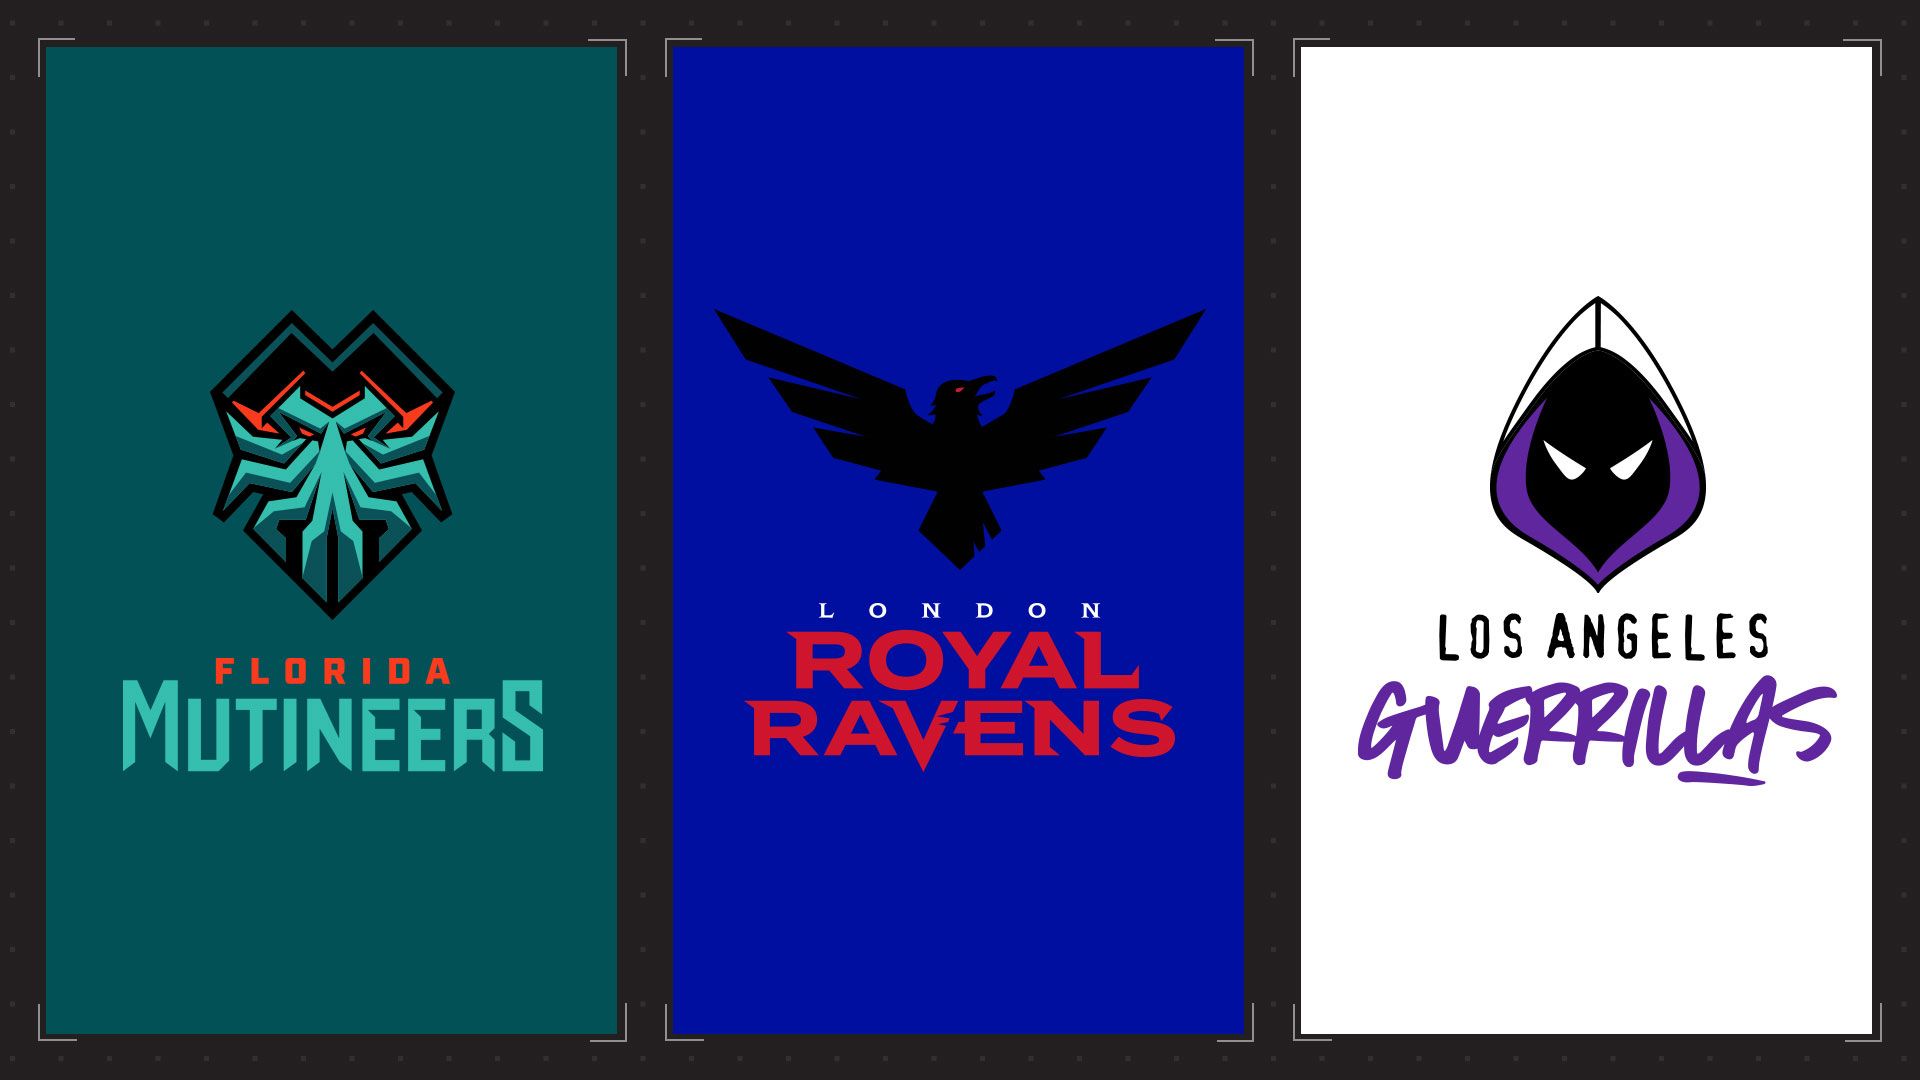 Why Your Team is OP: Florida Mutineers, London Royal Ravens, and Los Angeles Guerrillas